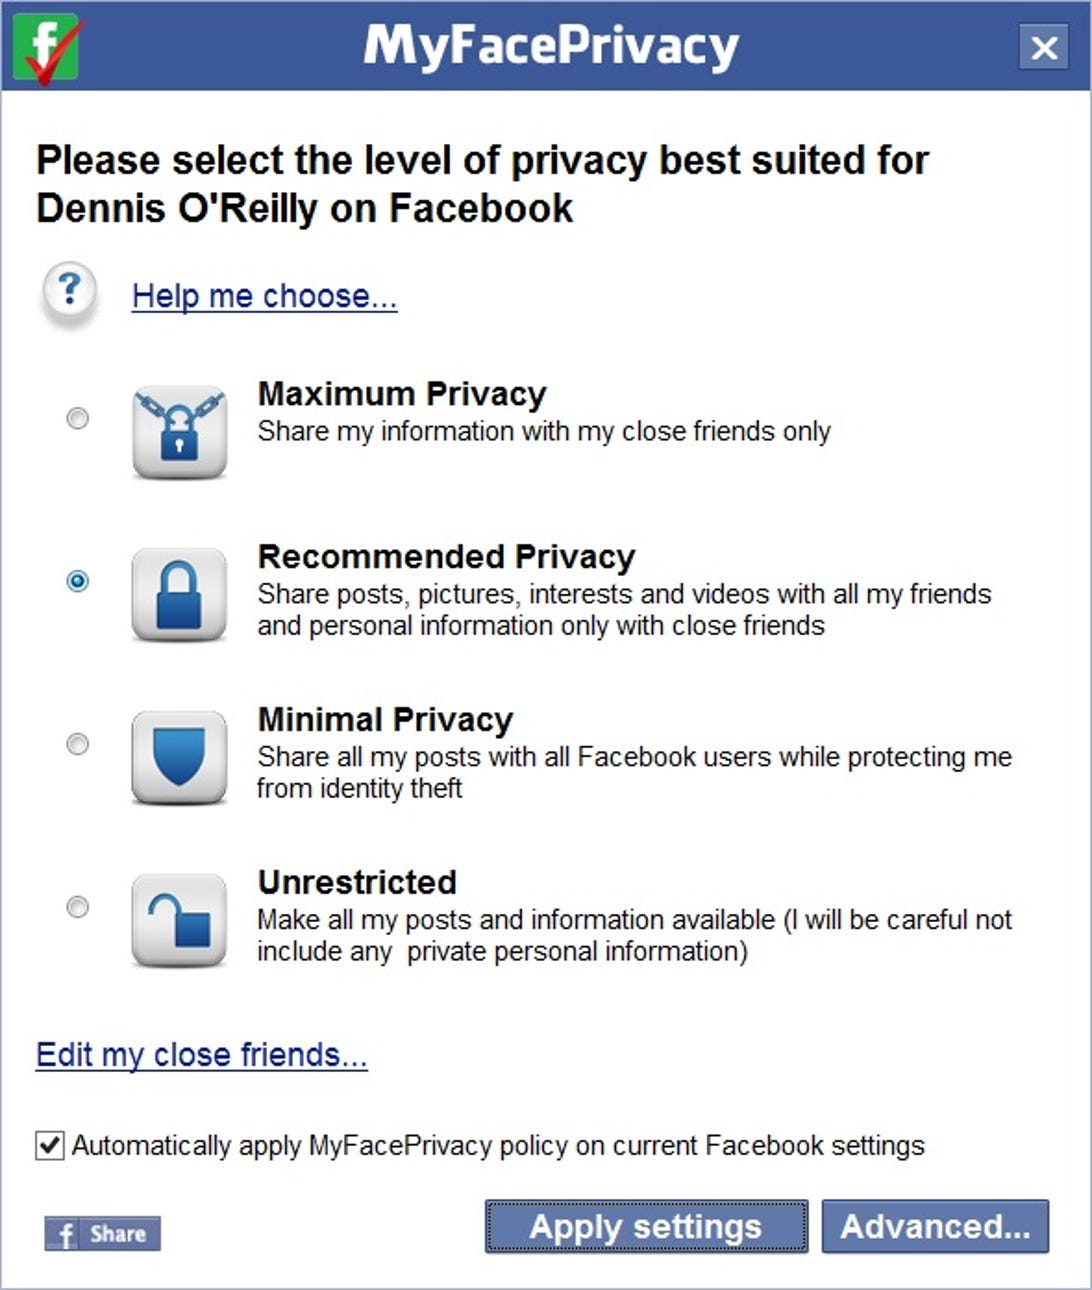 MyFacePrivacy preselected Facebook privacy settings